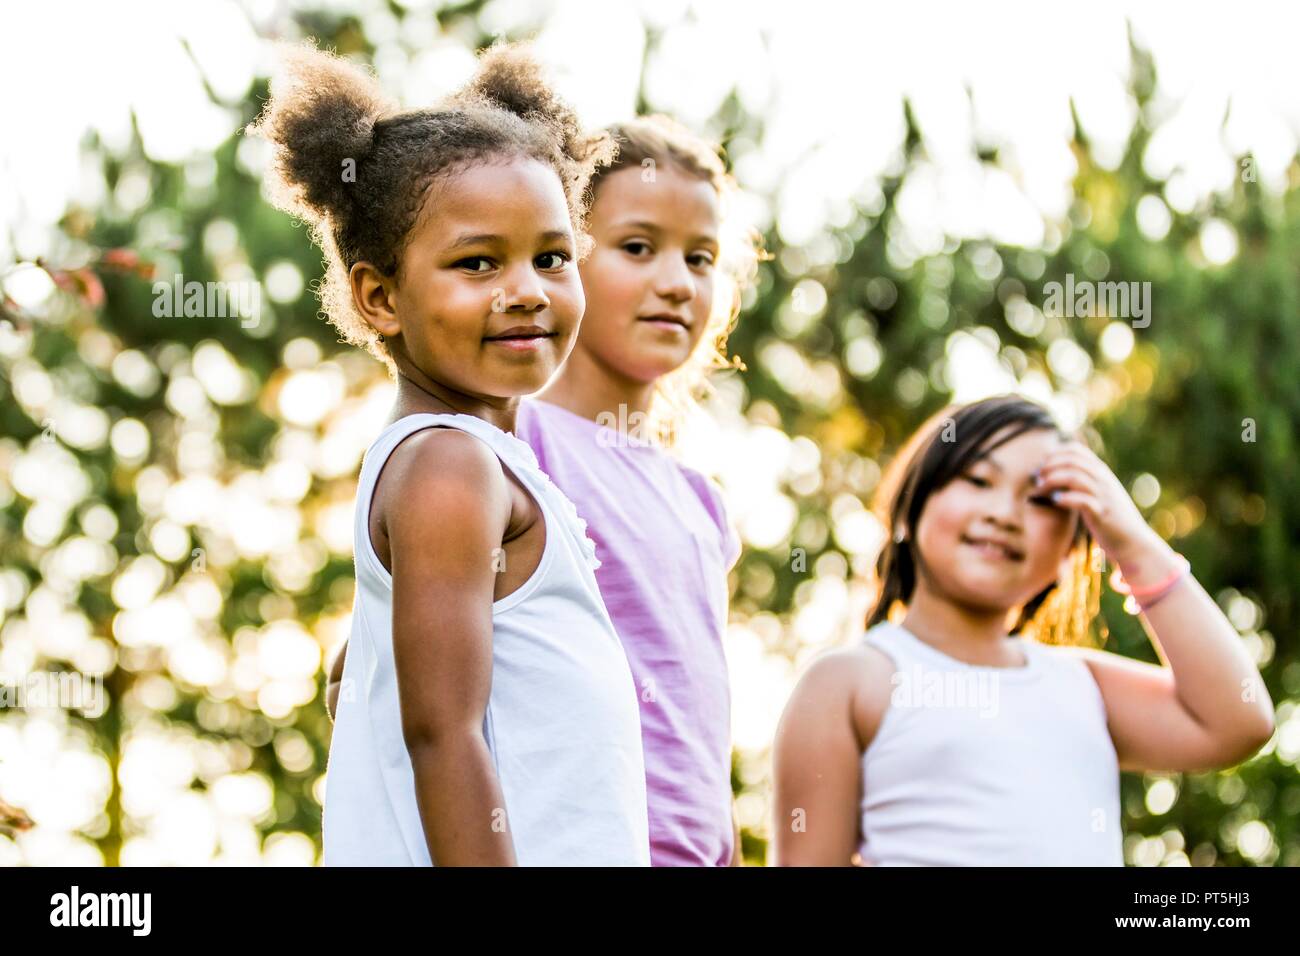 Portrait of girls smiling together in park while playing. Stock Photo